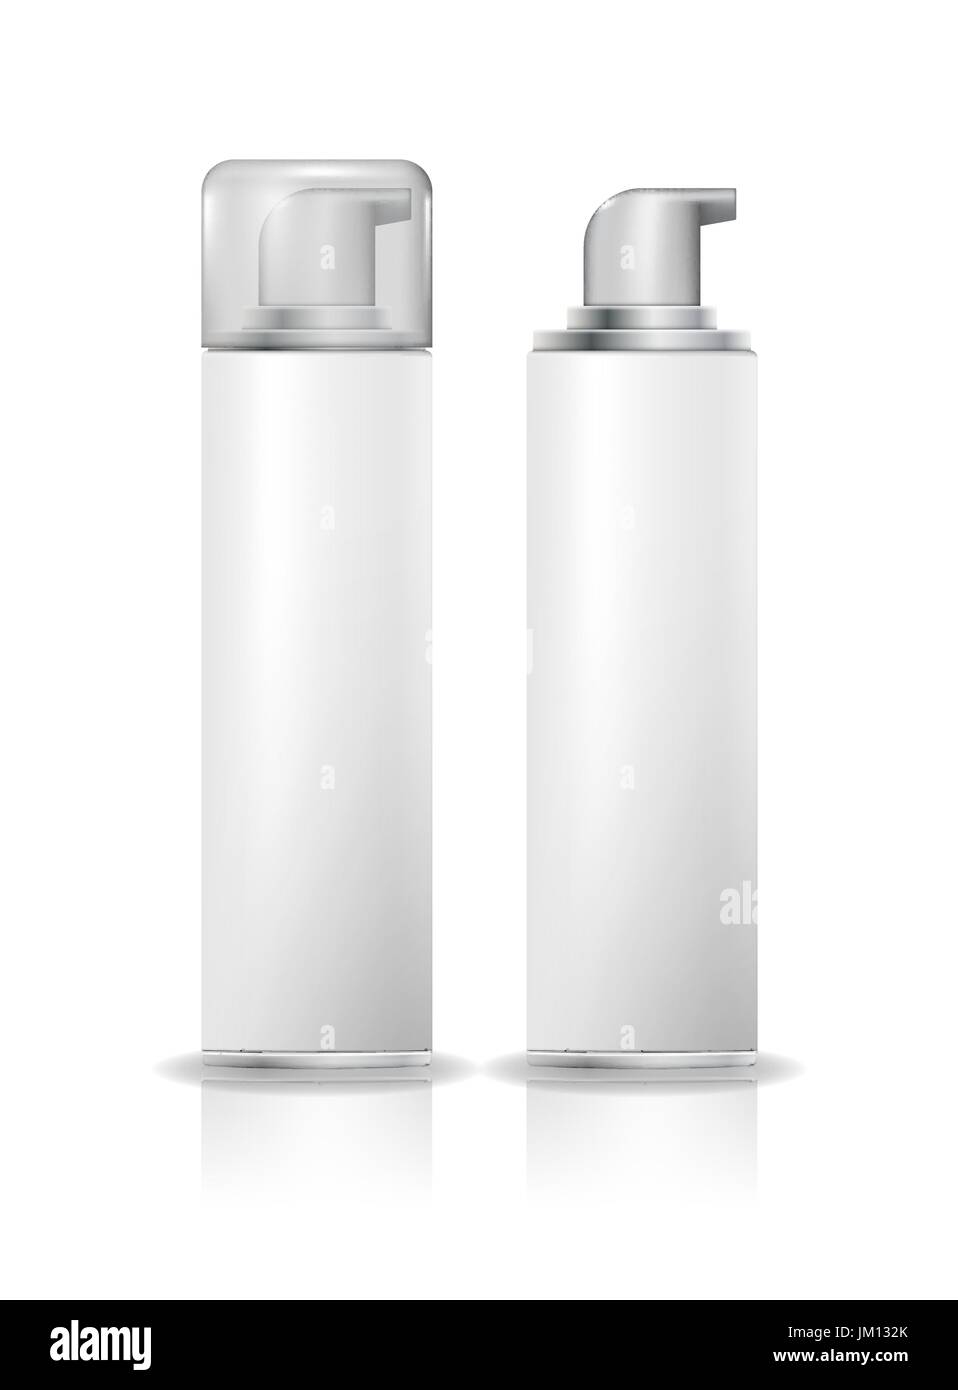 Shaving foam cosmetic bottle sprayer. White spray container mock up. vector illustration. Container with gel for shaving. Stock Vector